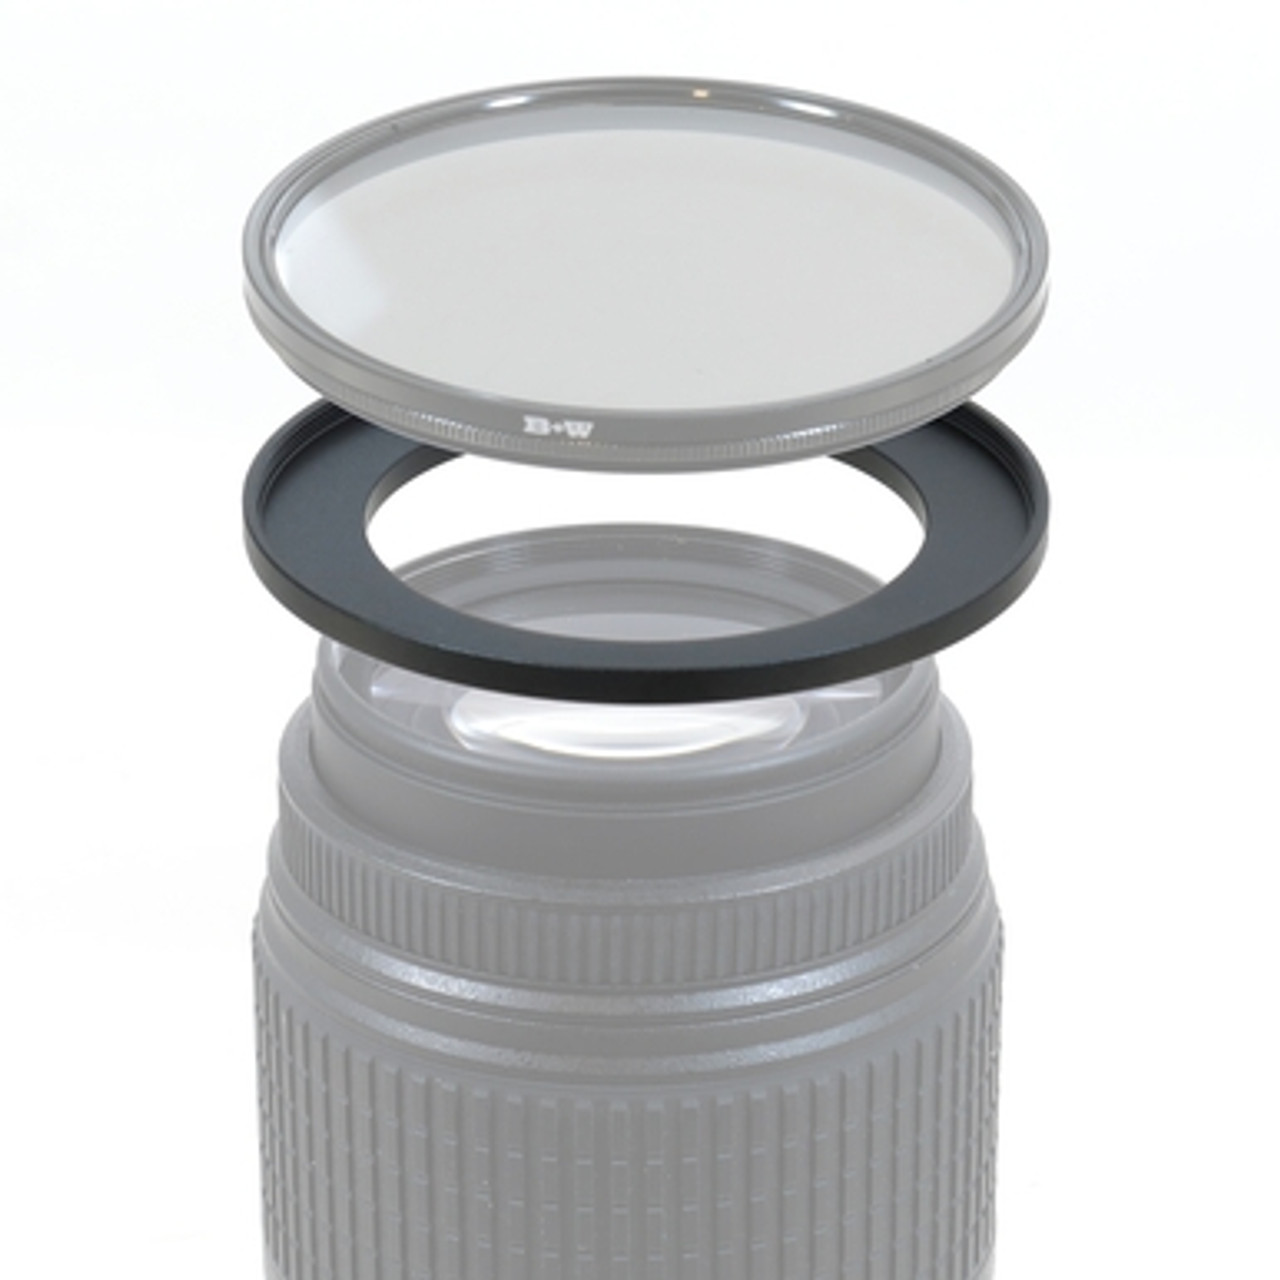 FILTER STEP-UP ADAPTER RING (27-37)